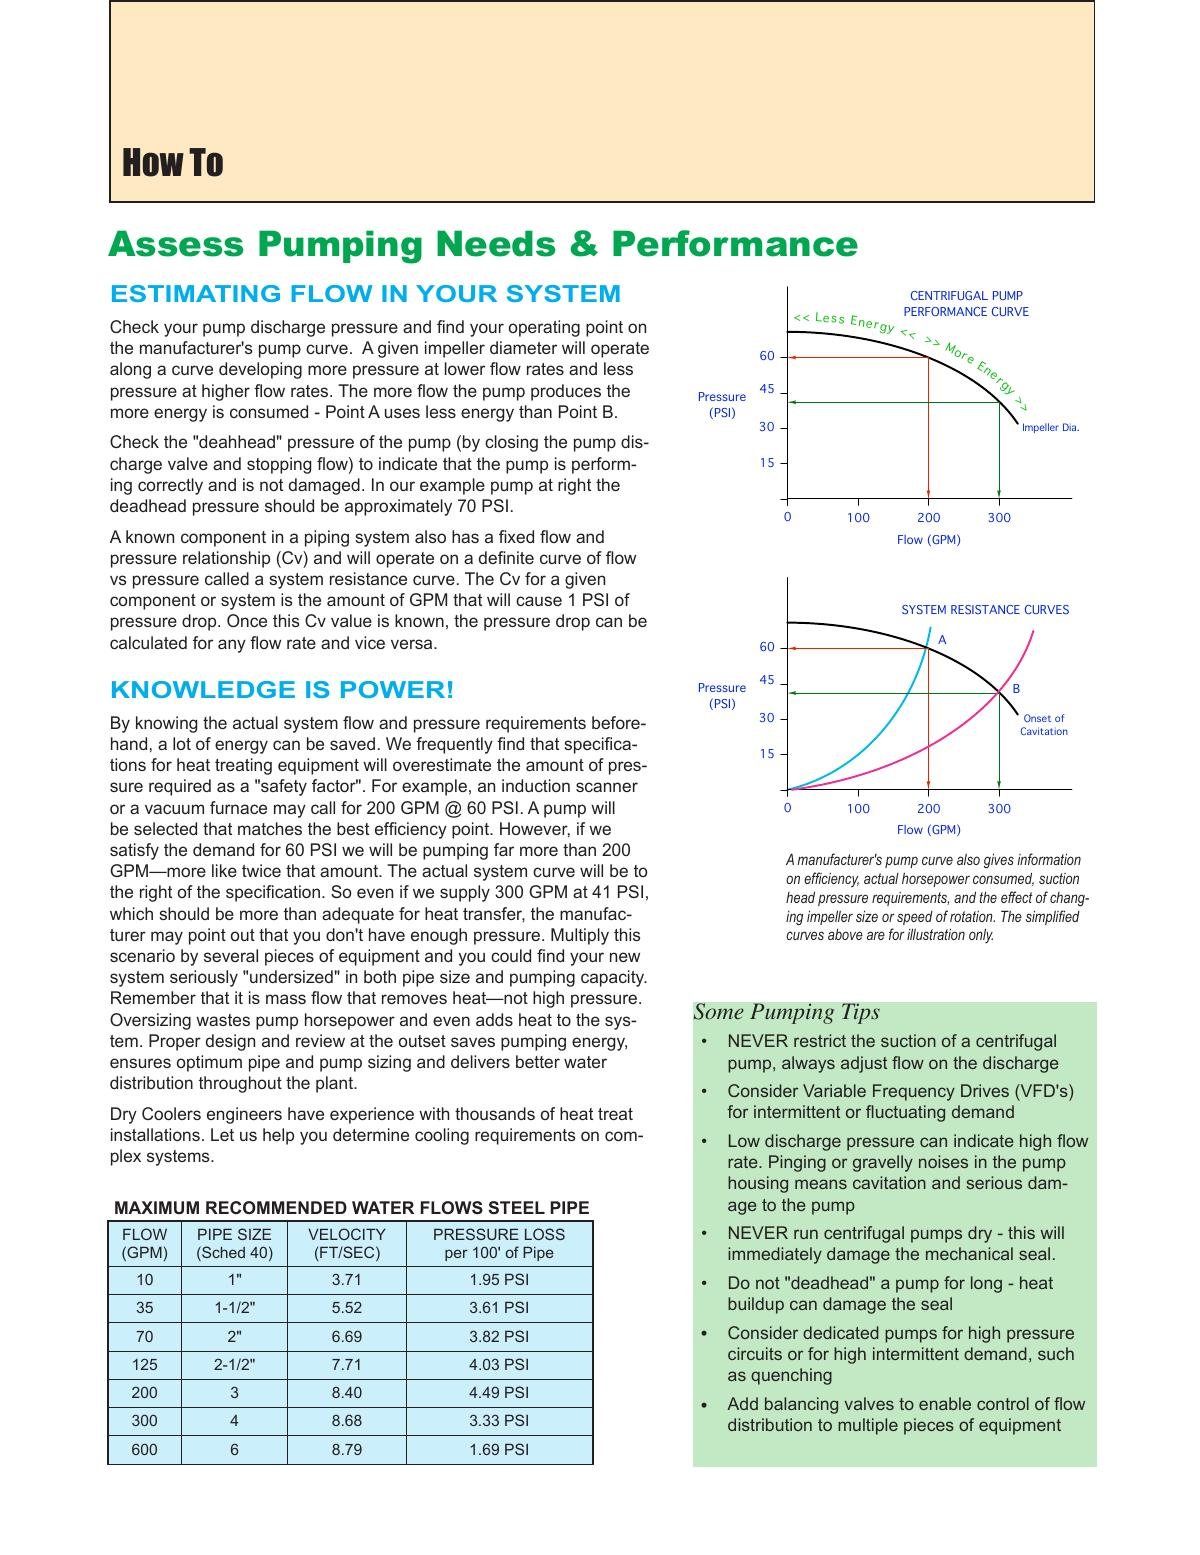 How to Assess Pumping Needs & Performance